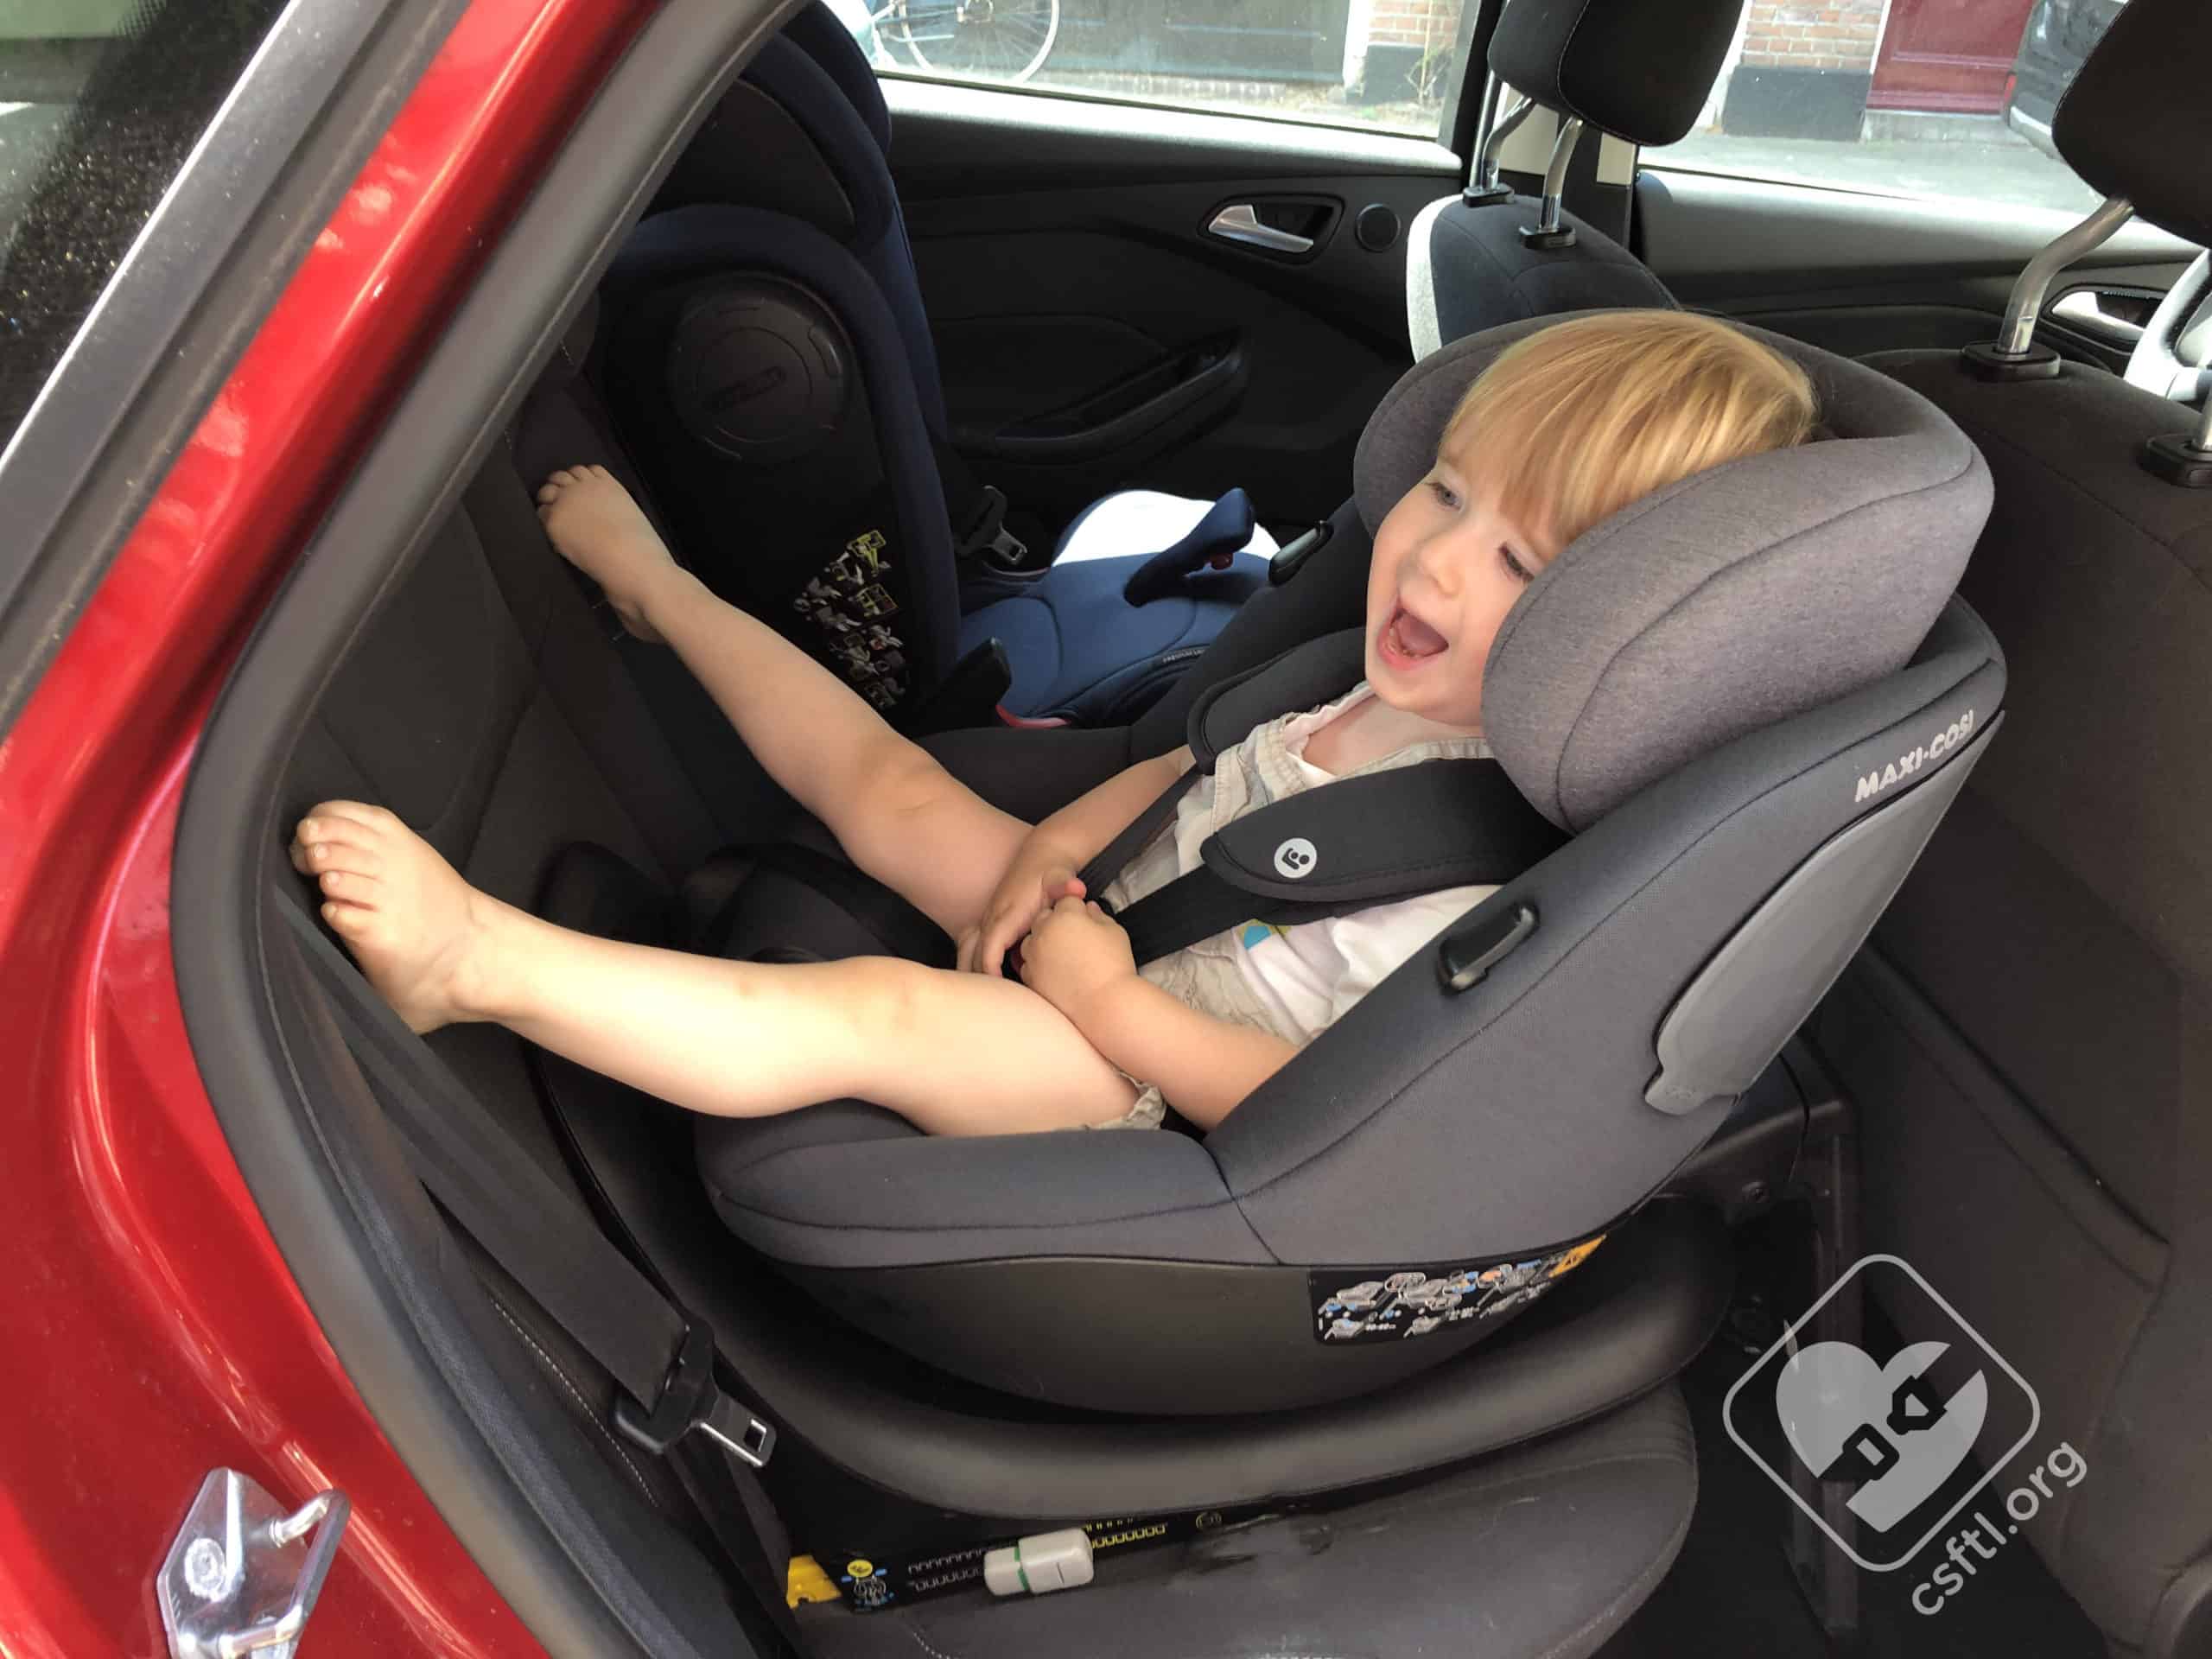 Maxi-Cosi Mica Review - European Car Seat - Car Seats For The Littles